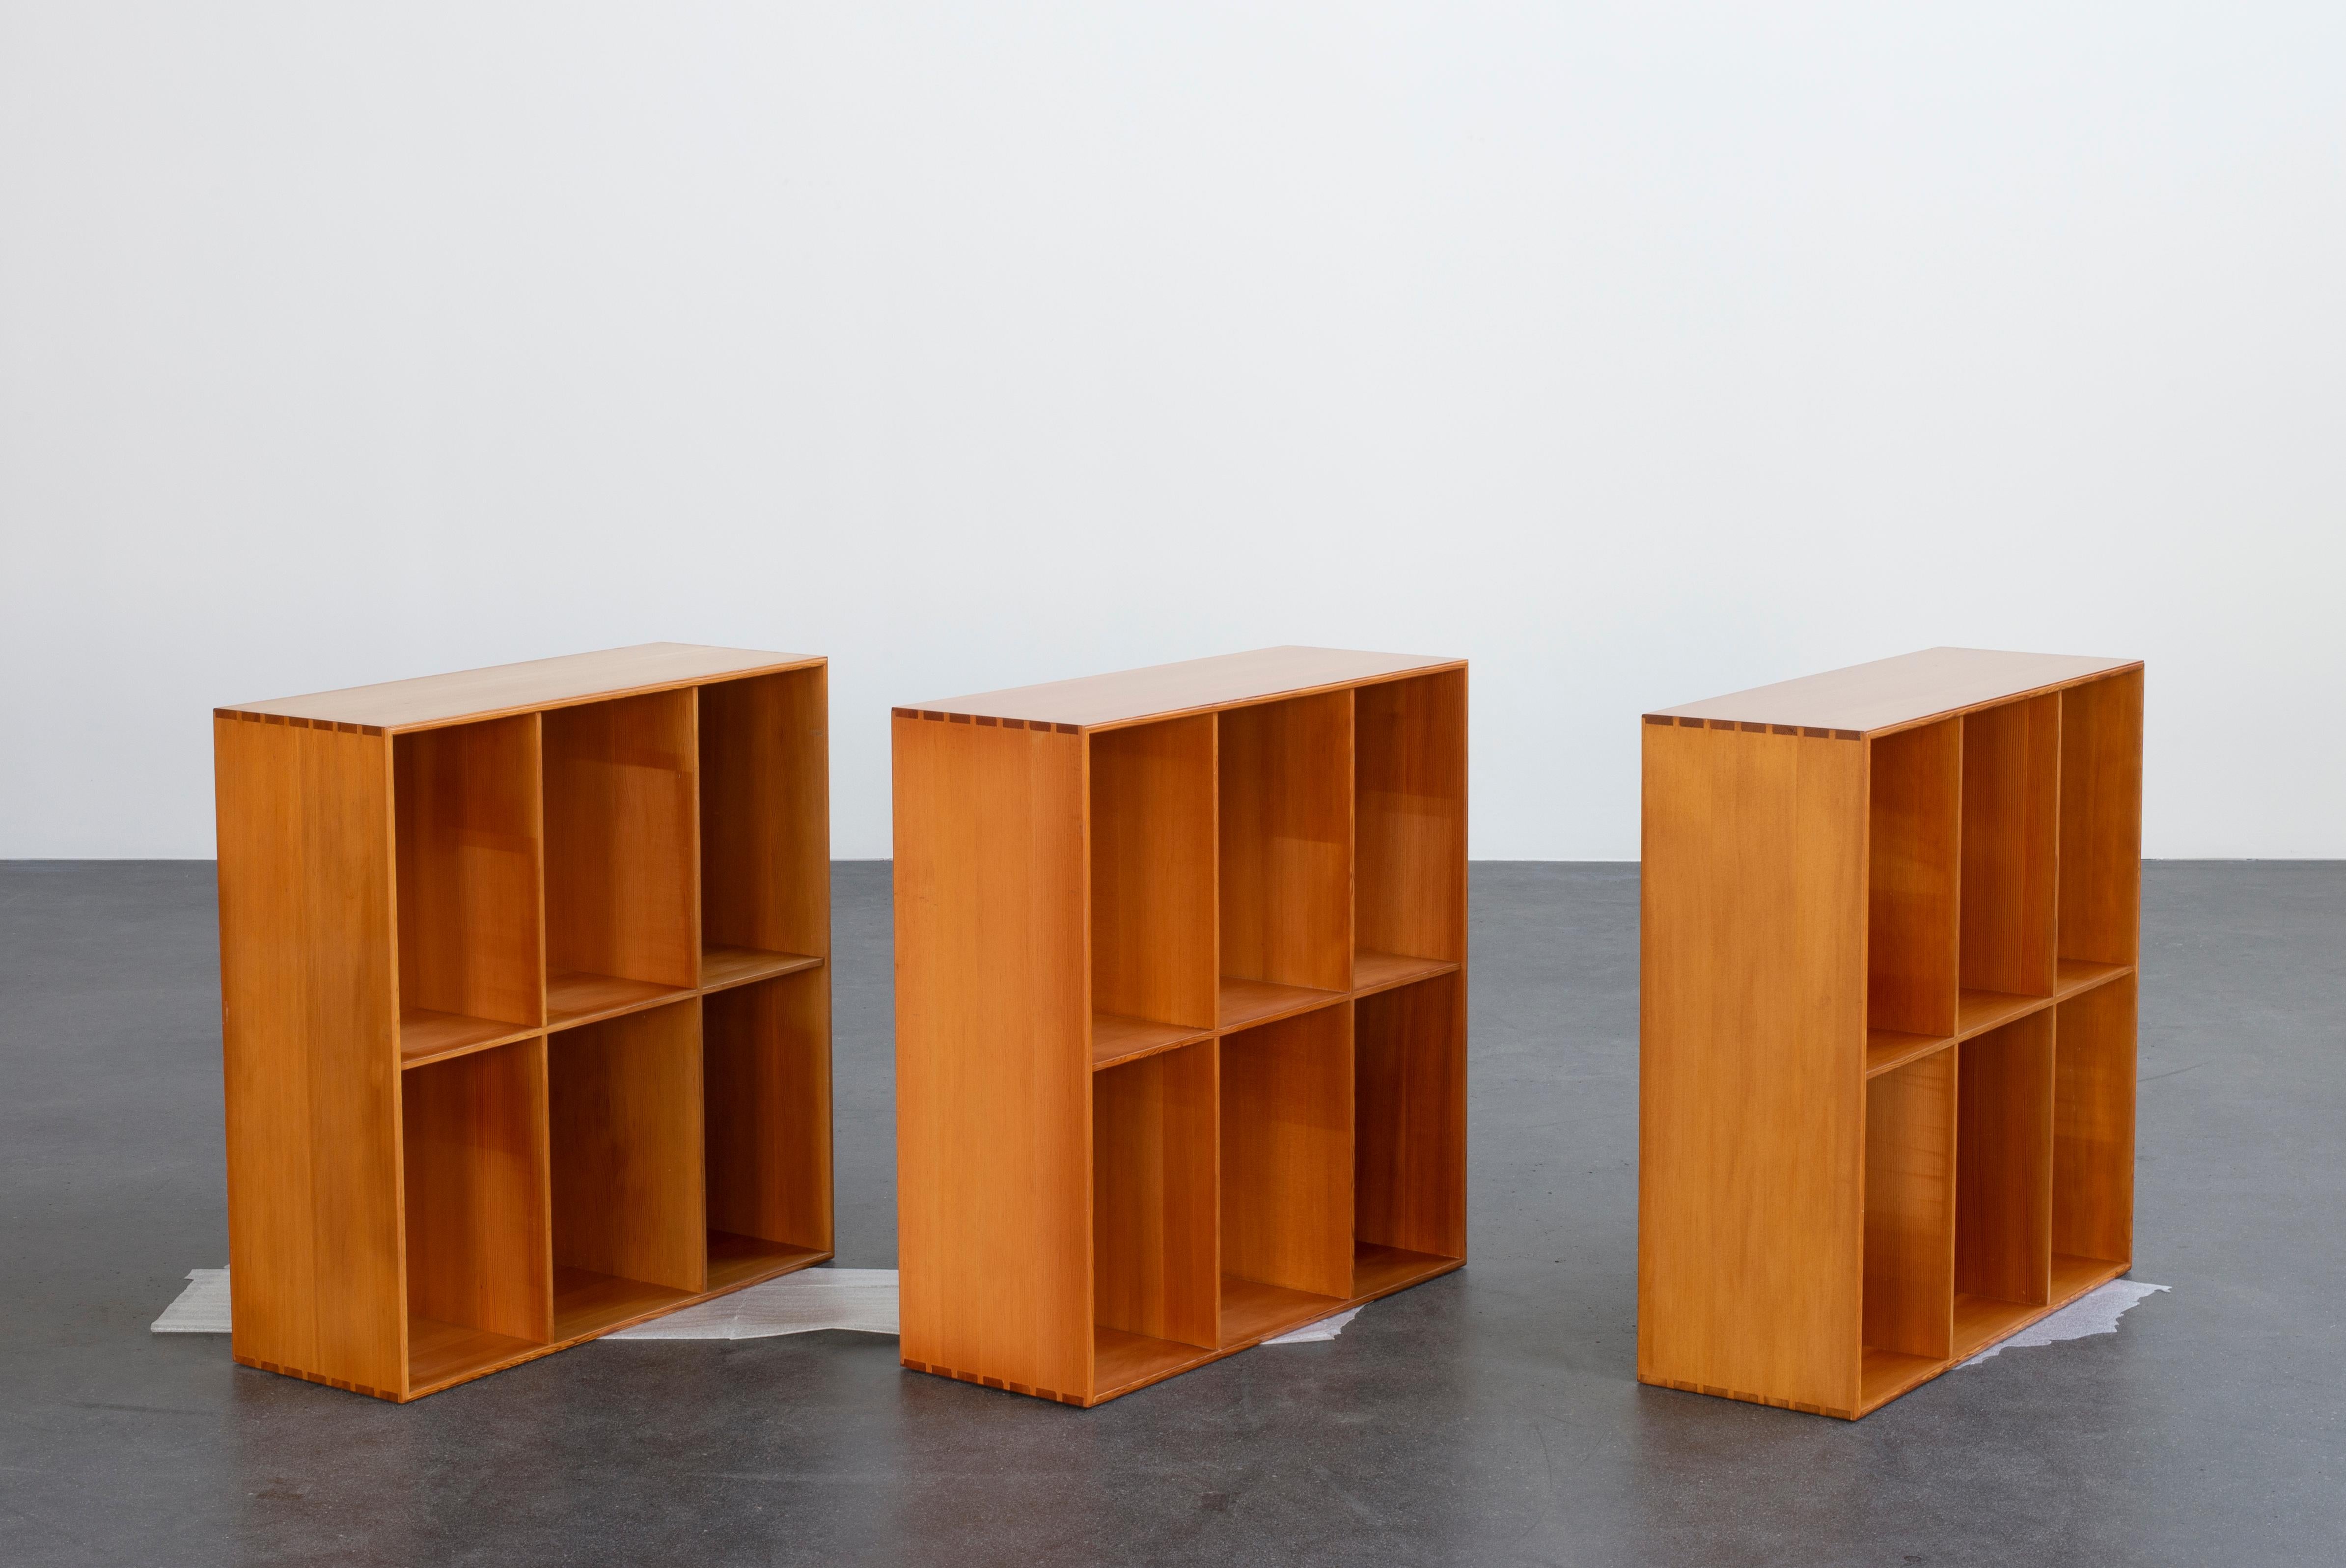 Lacquered Mogens Koch Three Bookcases in Oregon Pine for Rud, Rasmussen